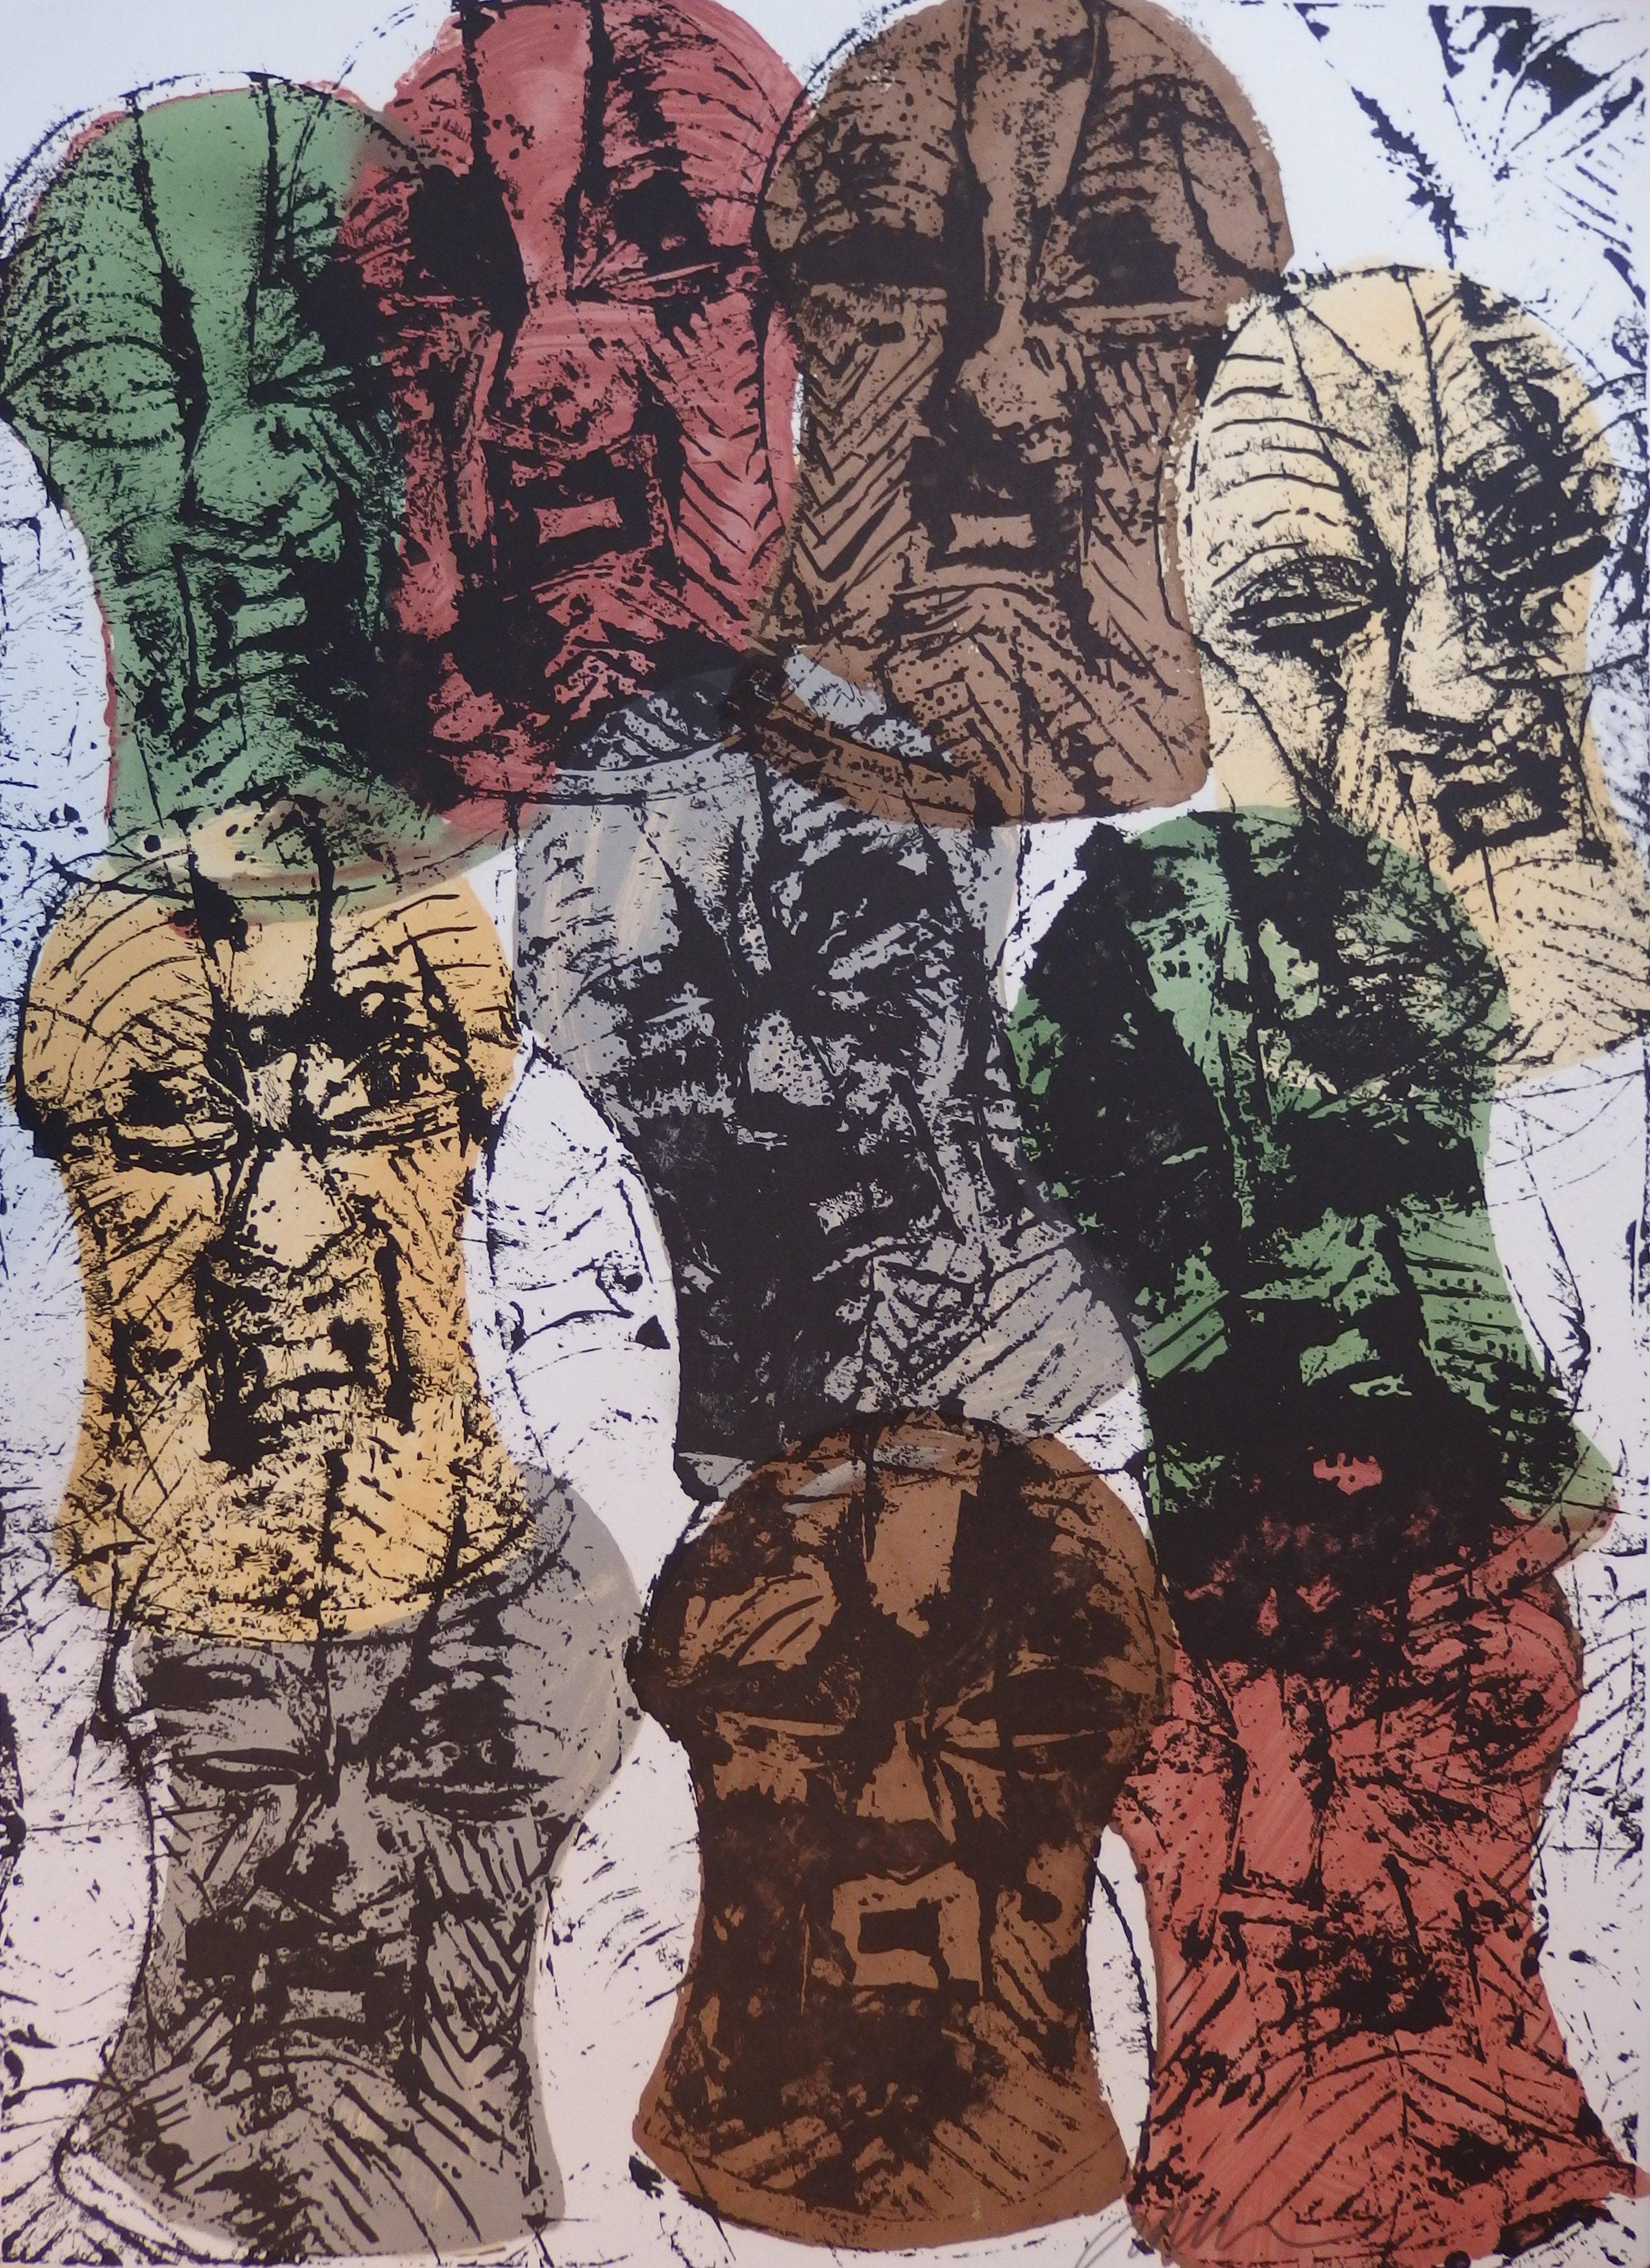 Arman Figurative Print - Accumulation of African Songue Masks - Original Handsigned Lithograph